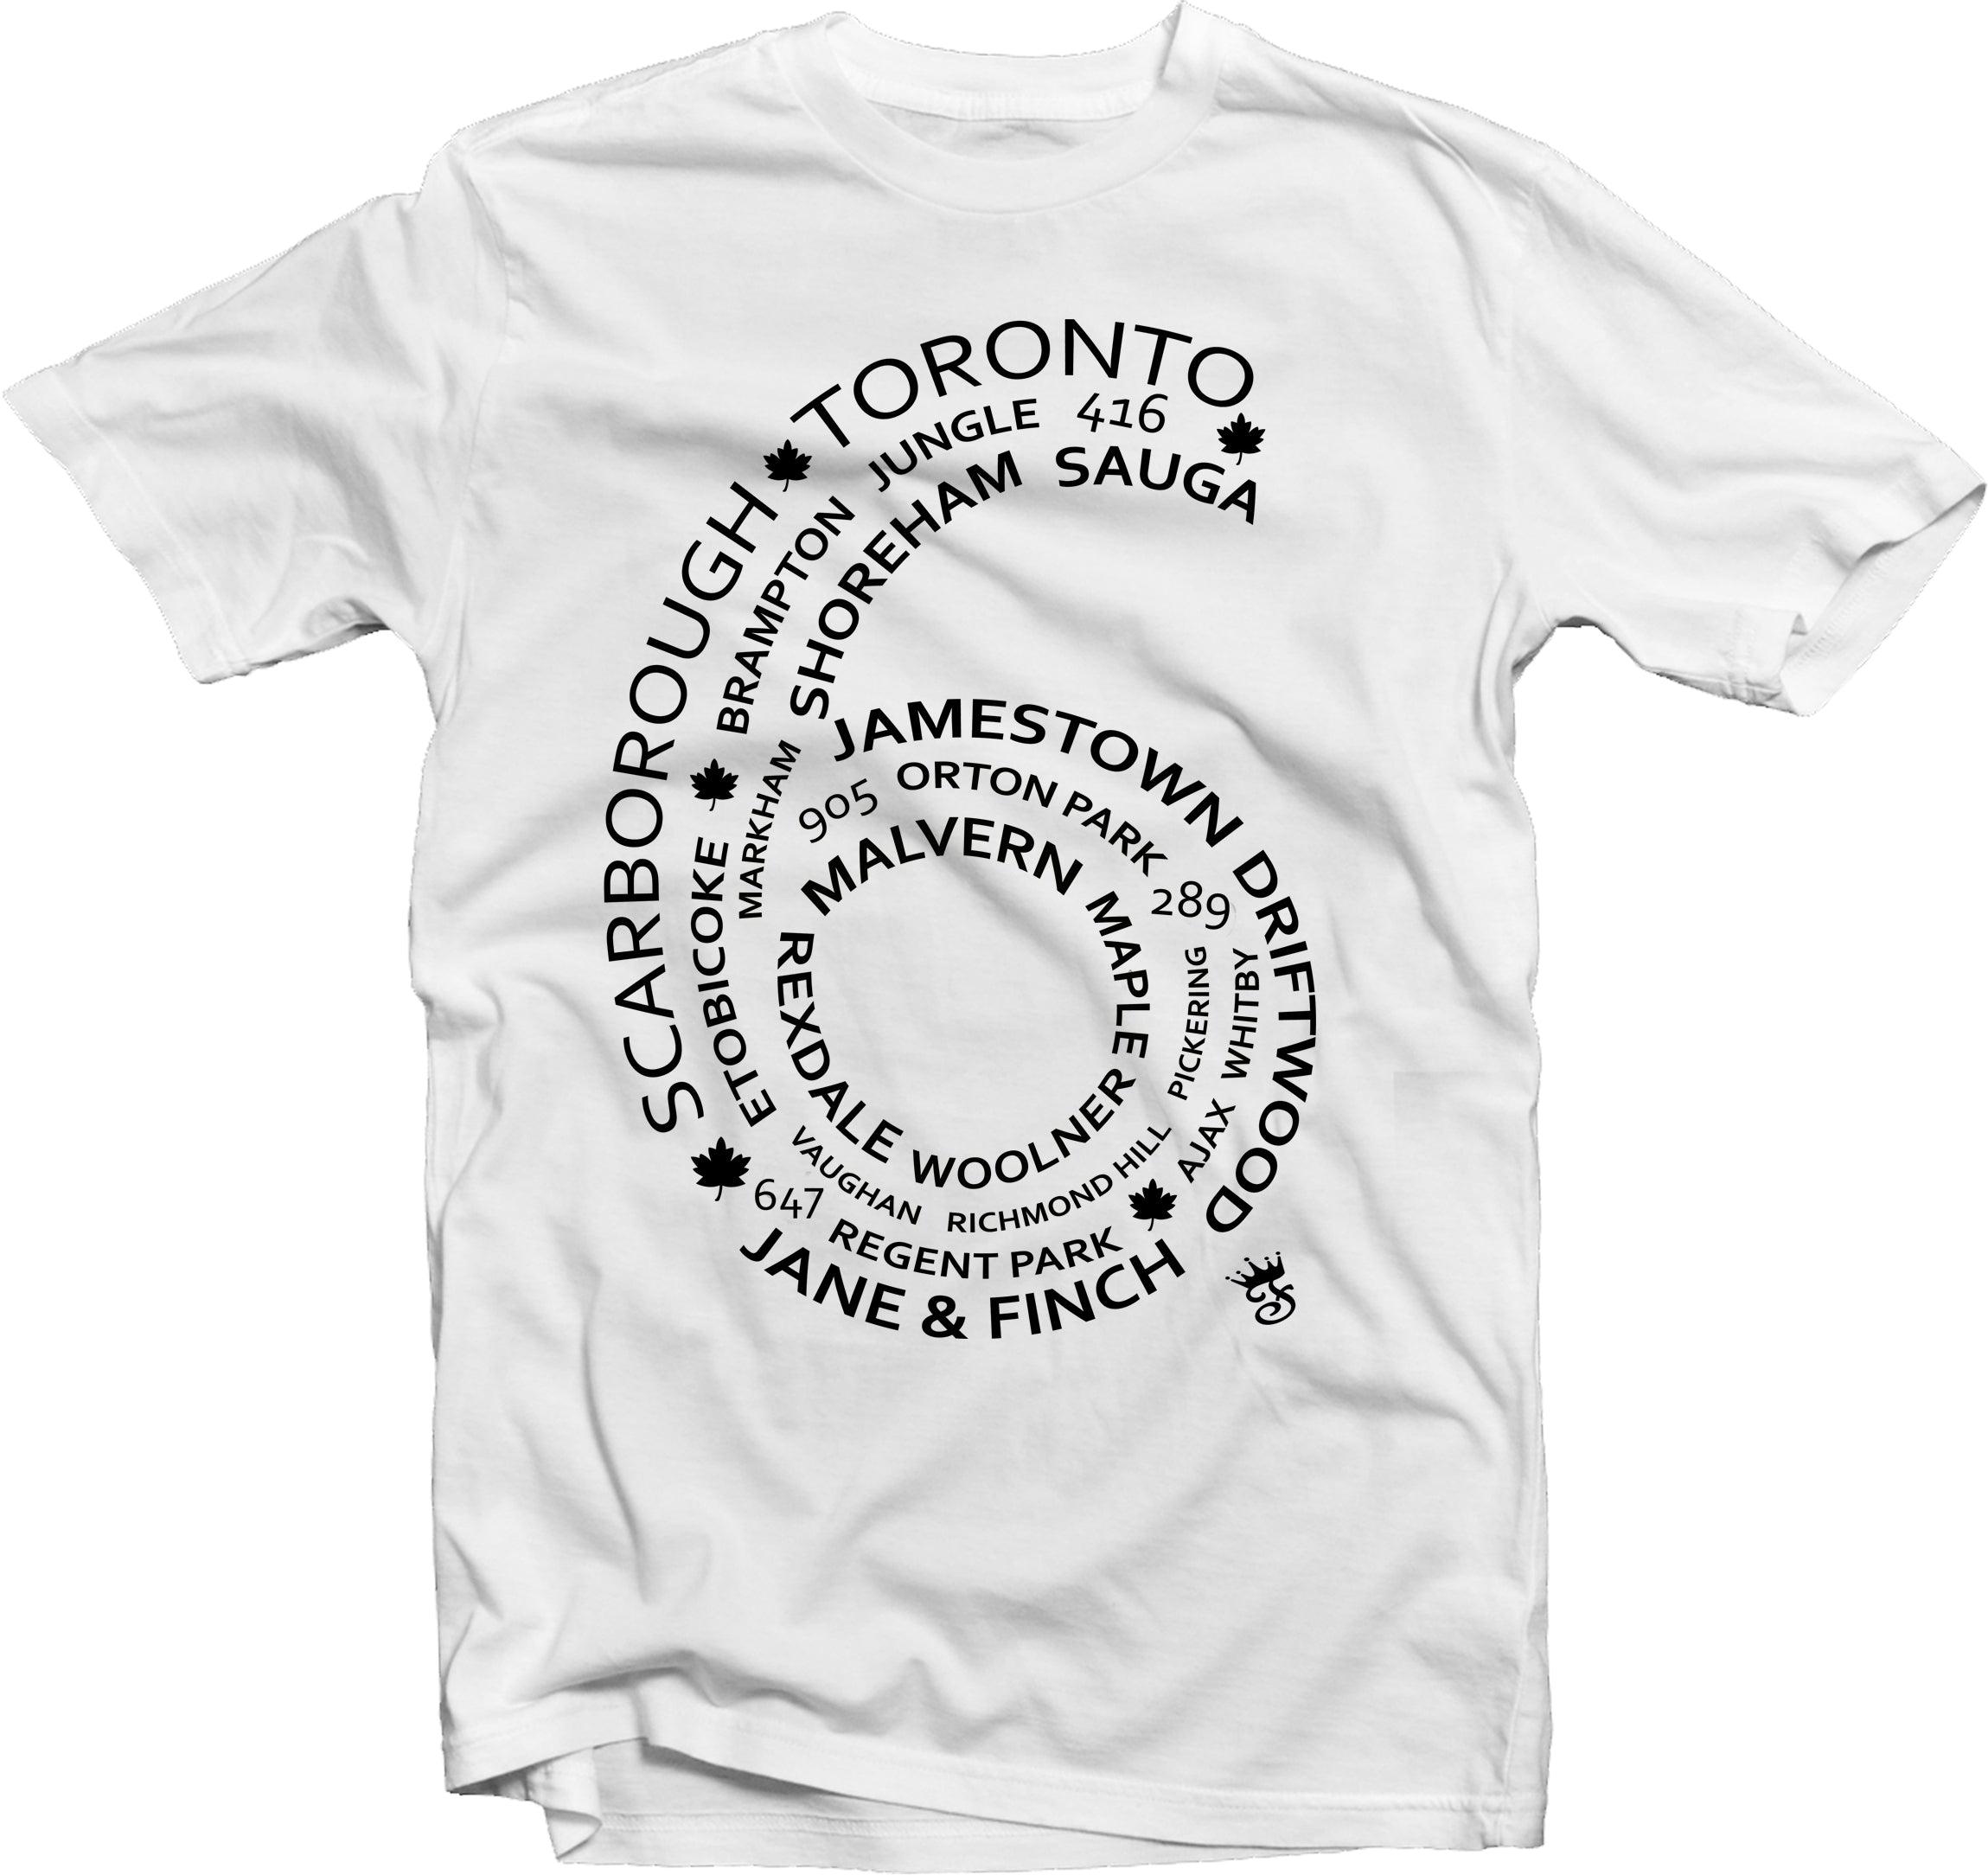 6 Side T shirt White streetwear - Famous Club Clothing - Famous Club Clothing